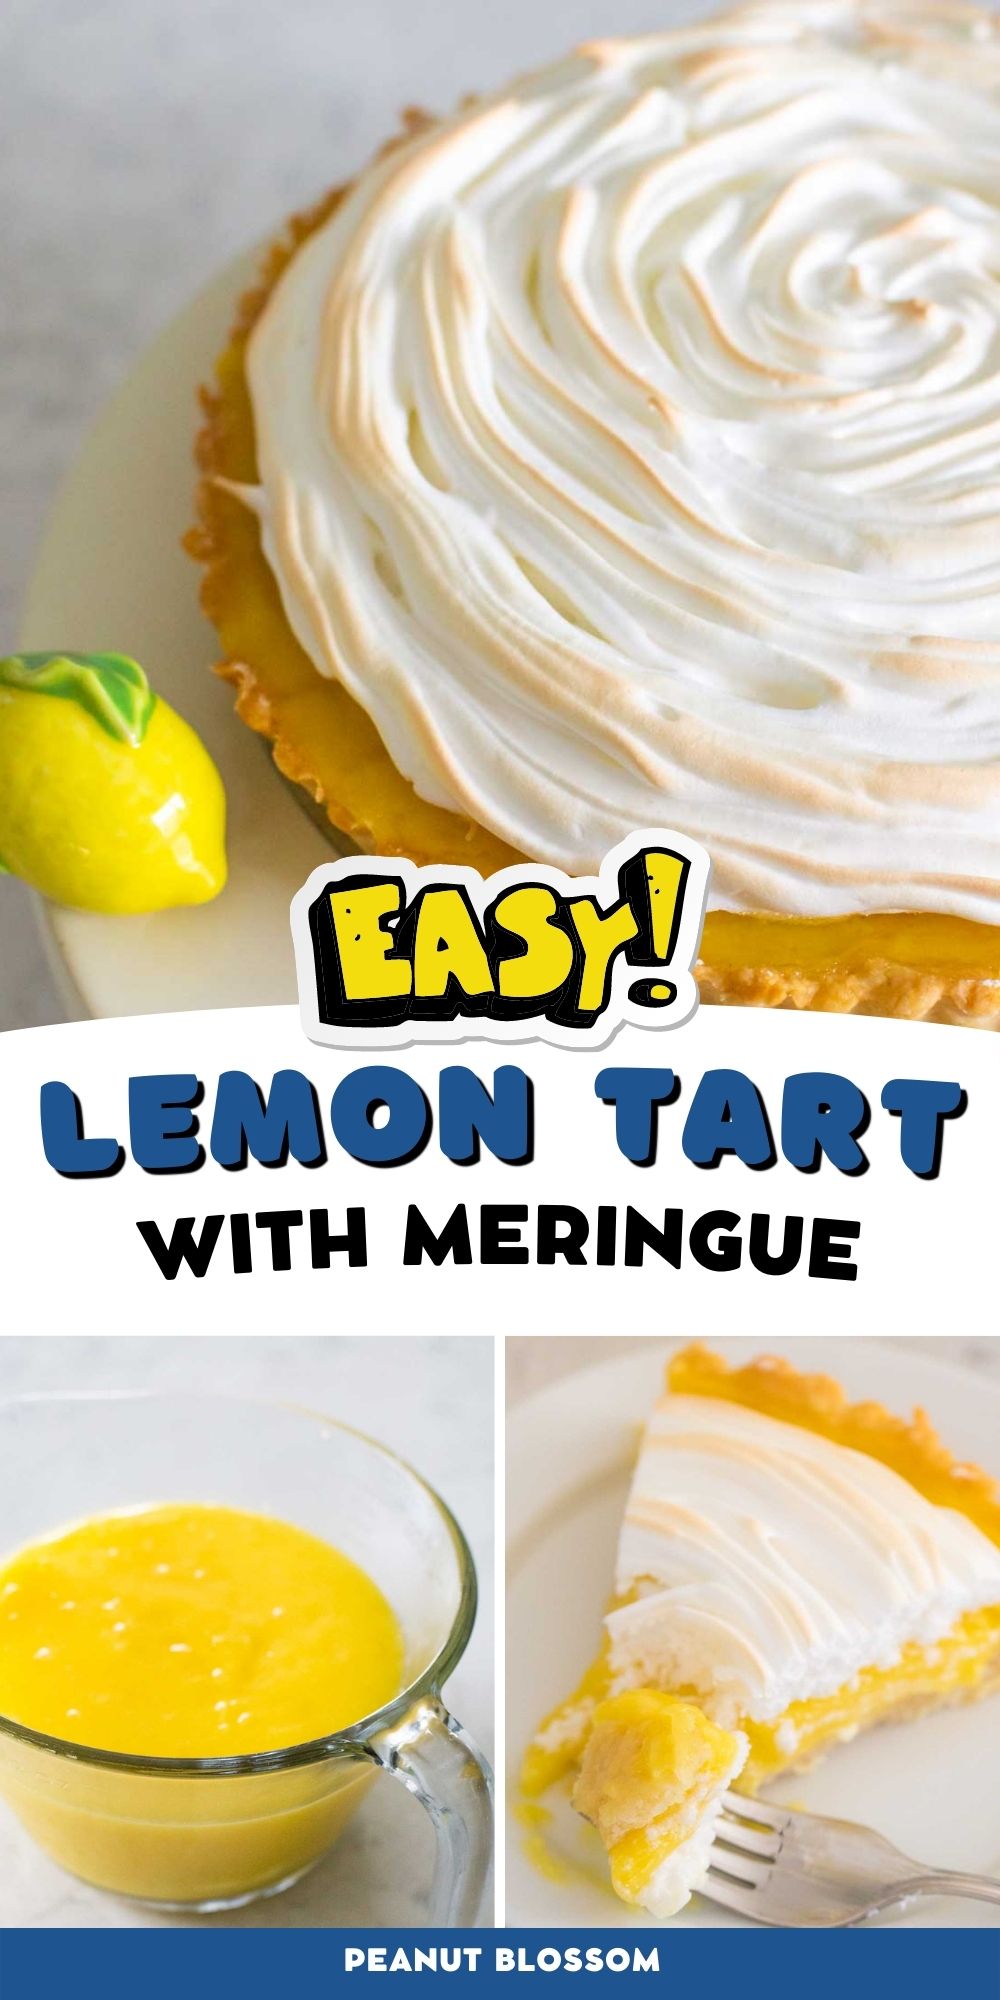 A photo collage shows the finished lemon tart, a bowl of lemon curd, and a slice of lemon meringue with a fork taking a bite.